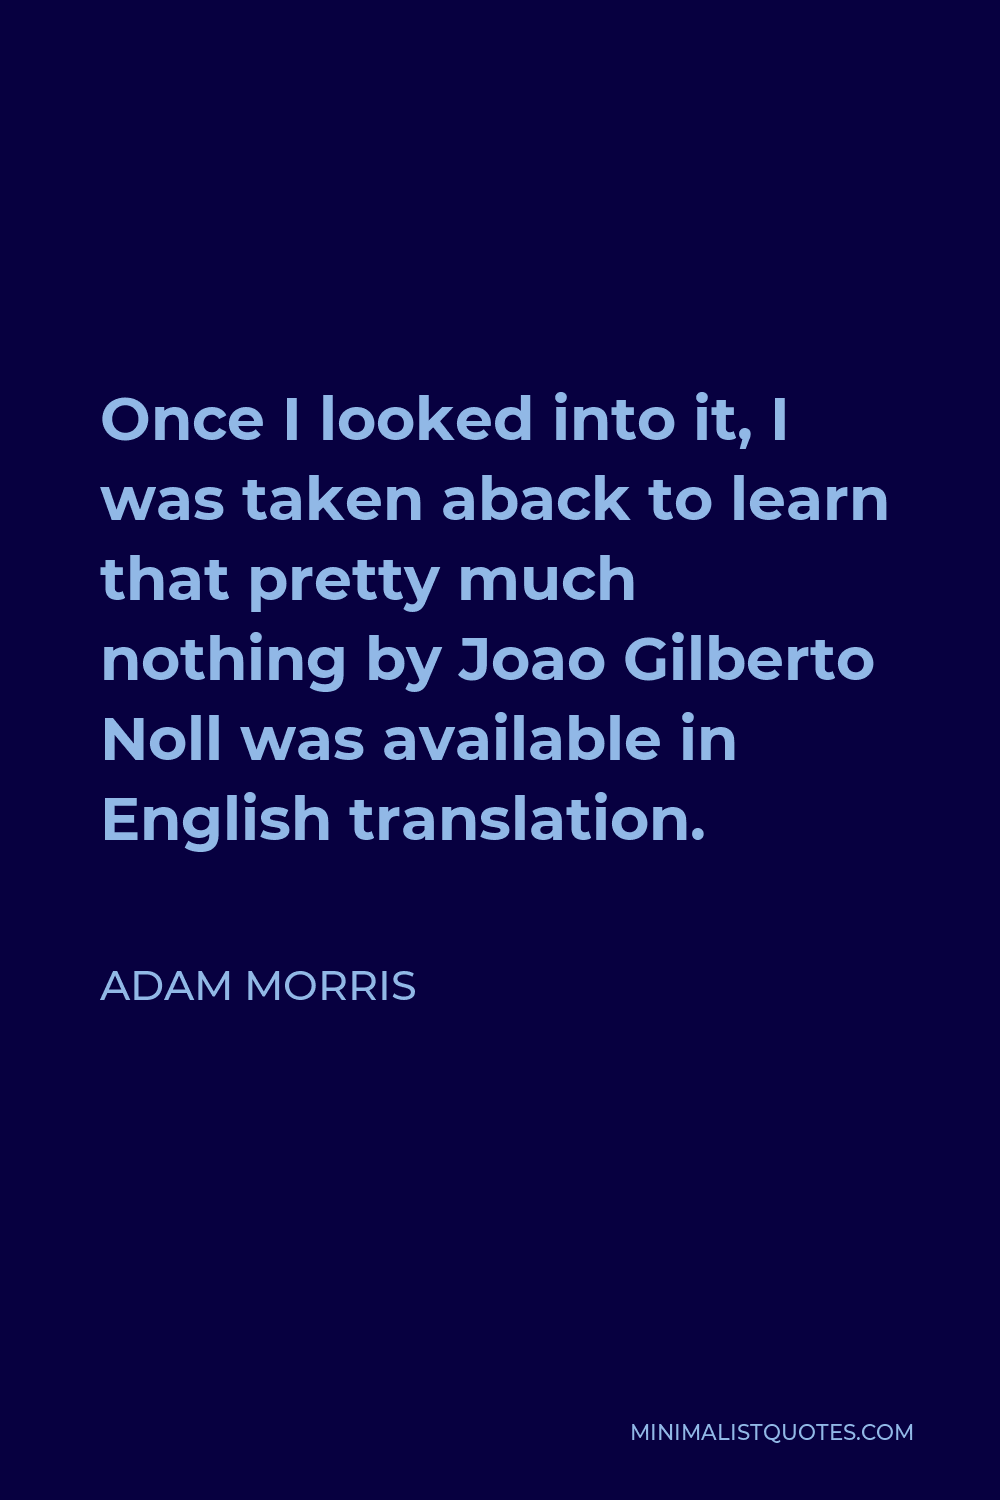 Adam Morris Quote - Once I looked into it, I was taken aback to learn that pretty much nothing by Joao Gilberto Noll was available in English translation.